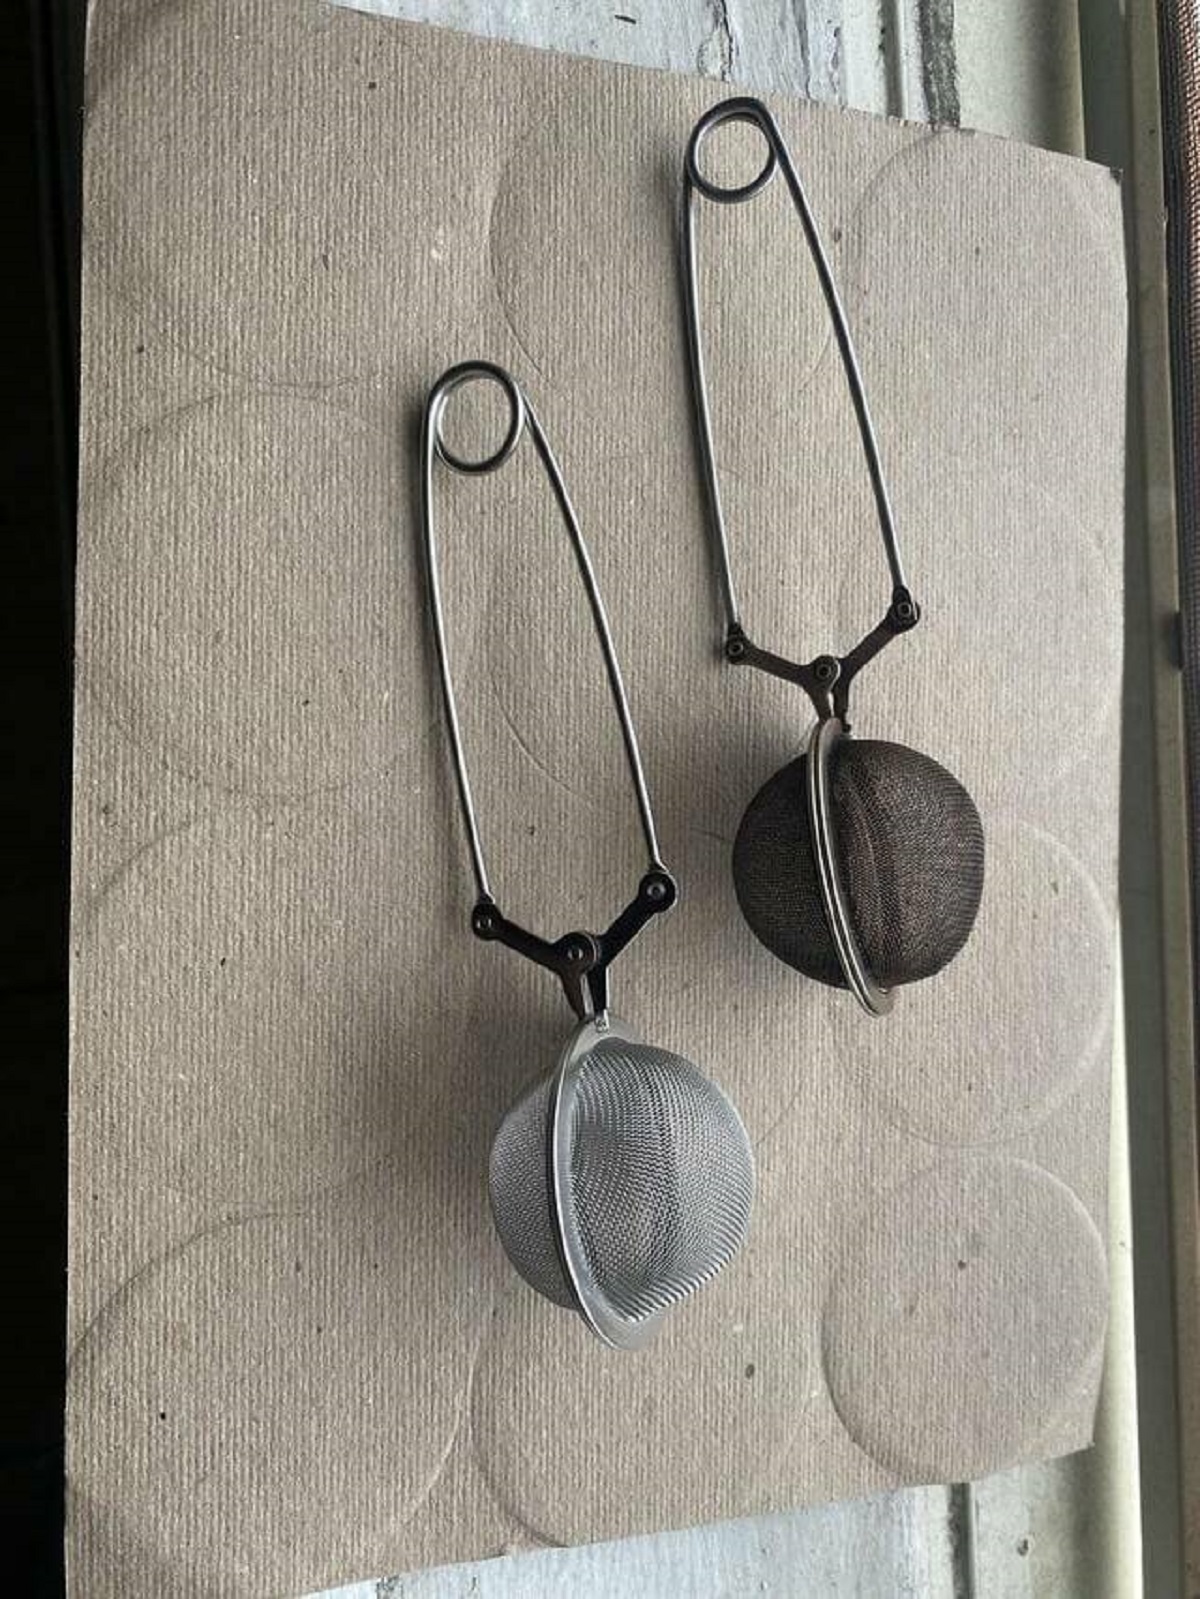 "The same tea ball: 15 years of use vs brand new replacement."